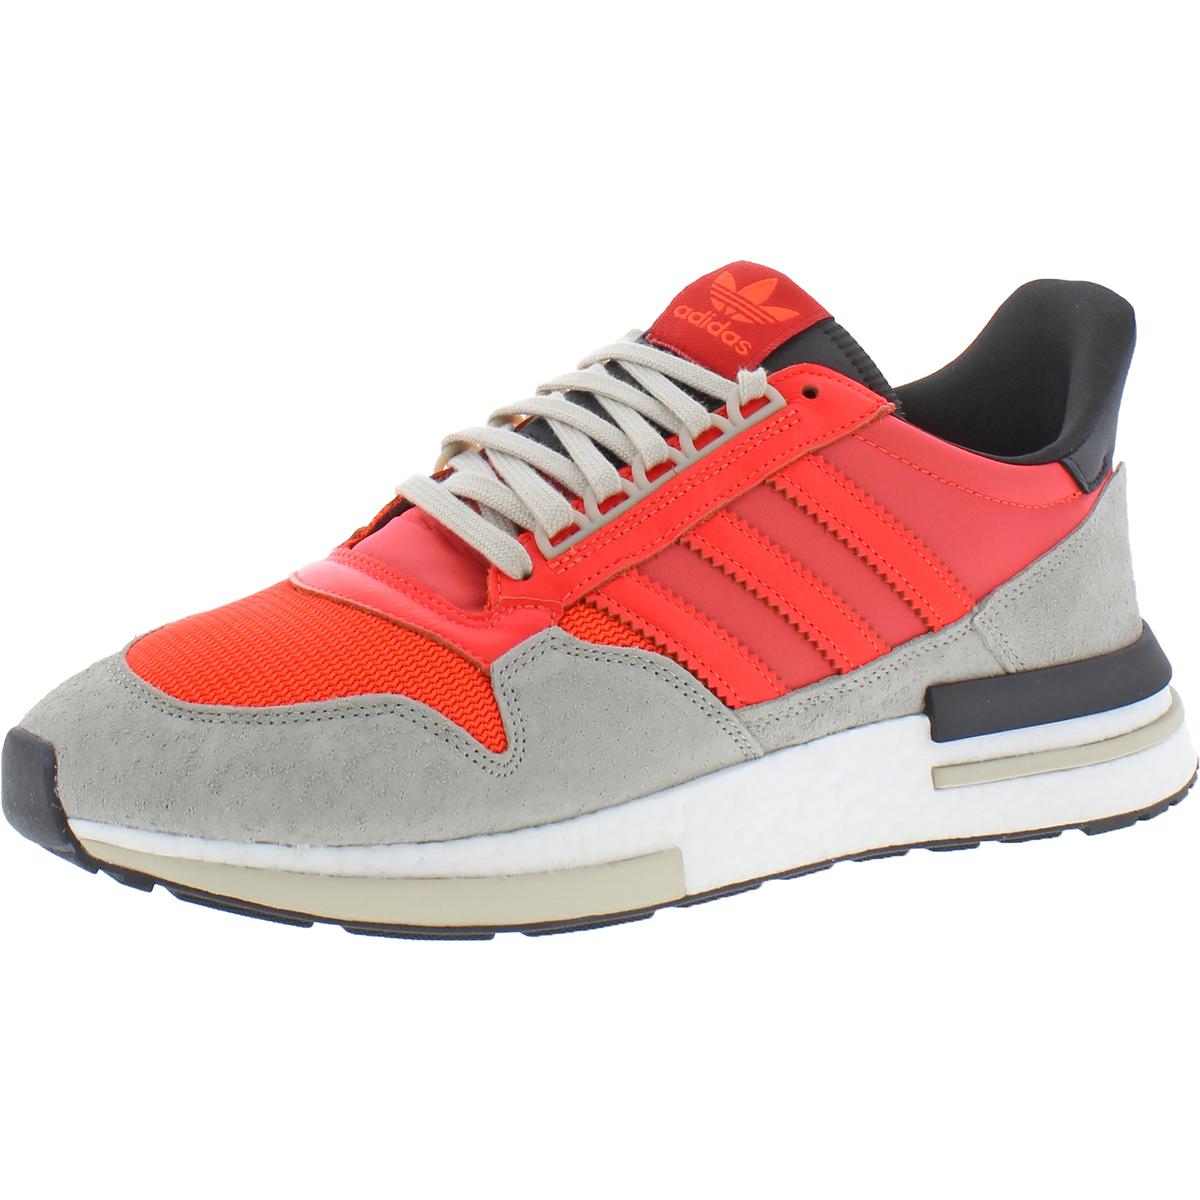 Zx 500 Rm Mens Lifestyle Low Top Fashion Sneakers